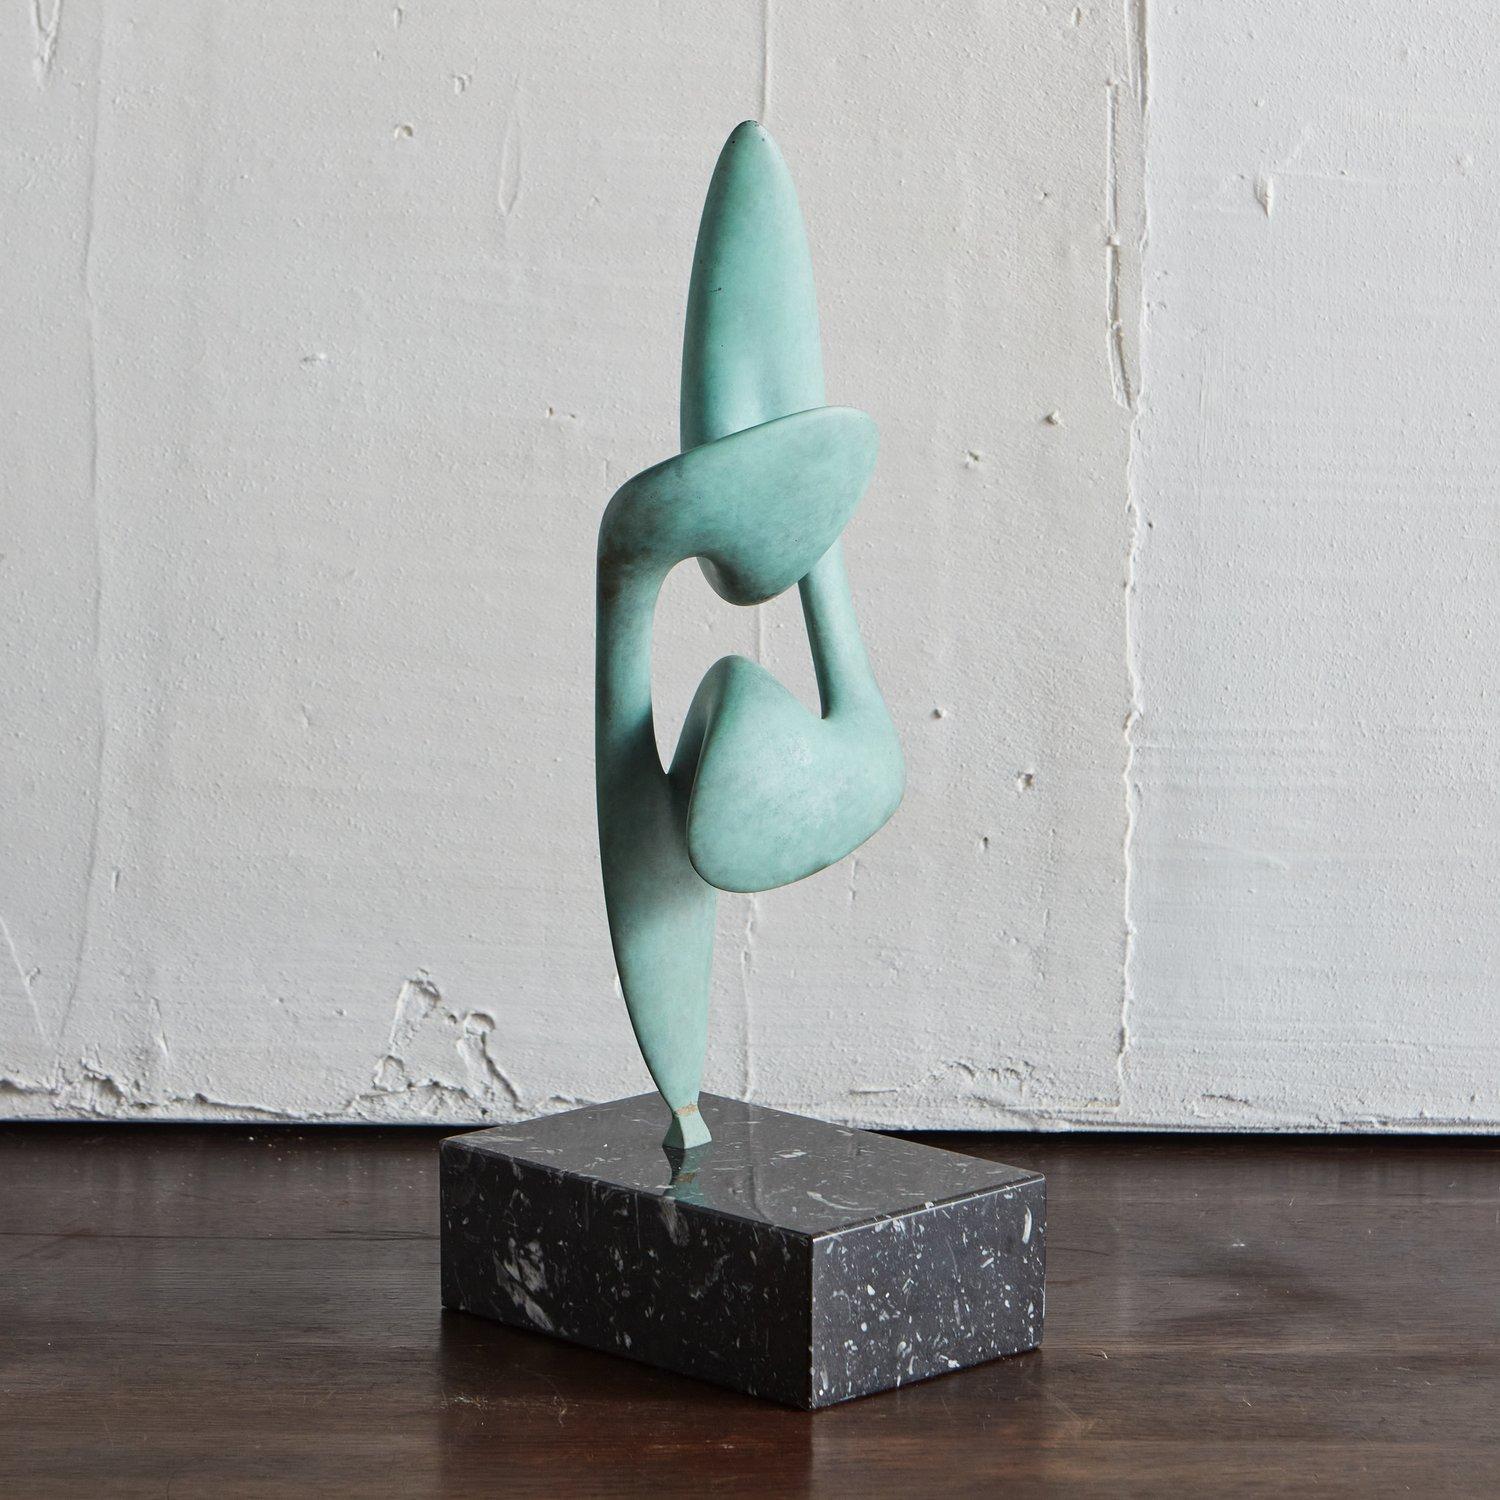 The Telomere twist sculpture by Chicago artist Karl Geckler. Featured here in Verde Gris finish and mounted on a polished black marble base.

This piece is available standard in a Satin Bronze Finish for $3,120, with a Polished Black Granite or